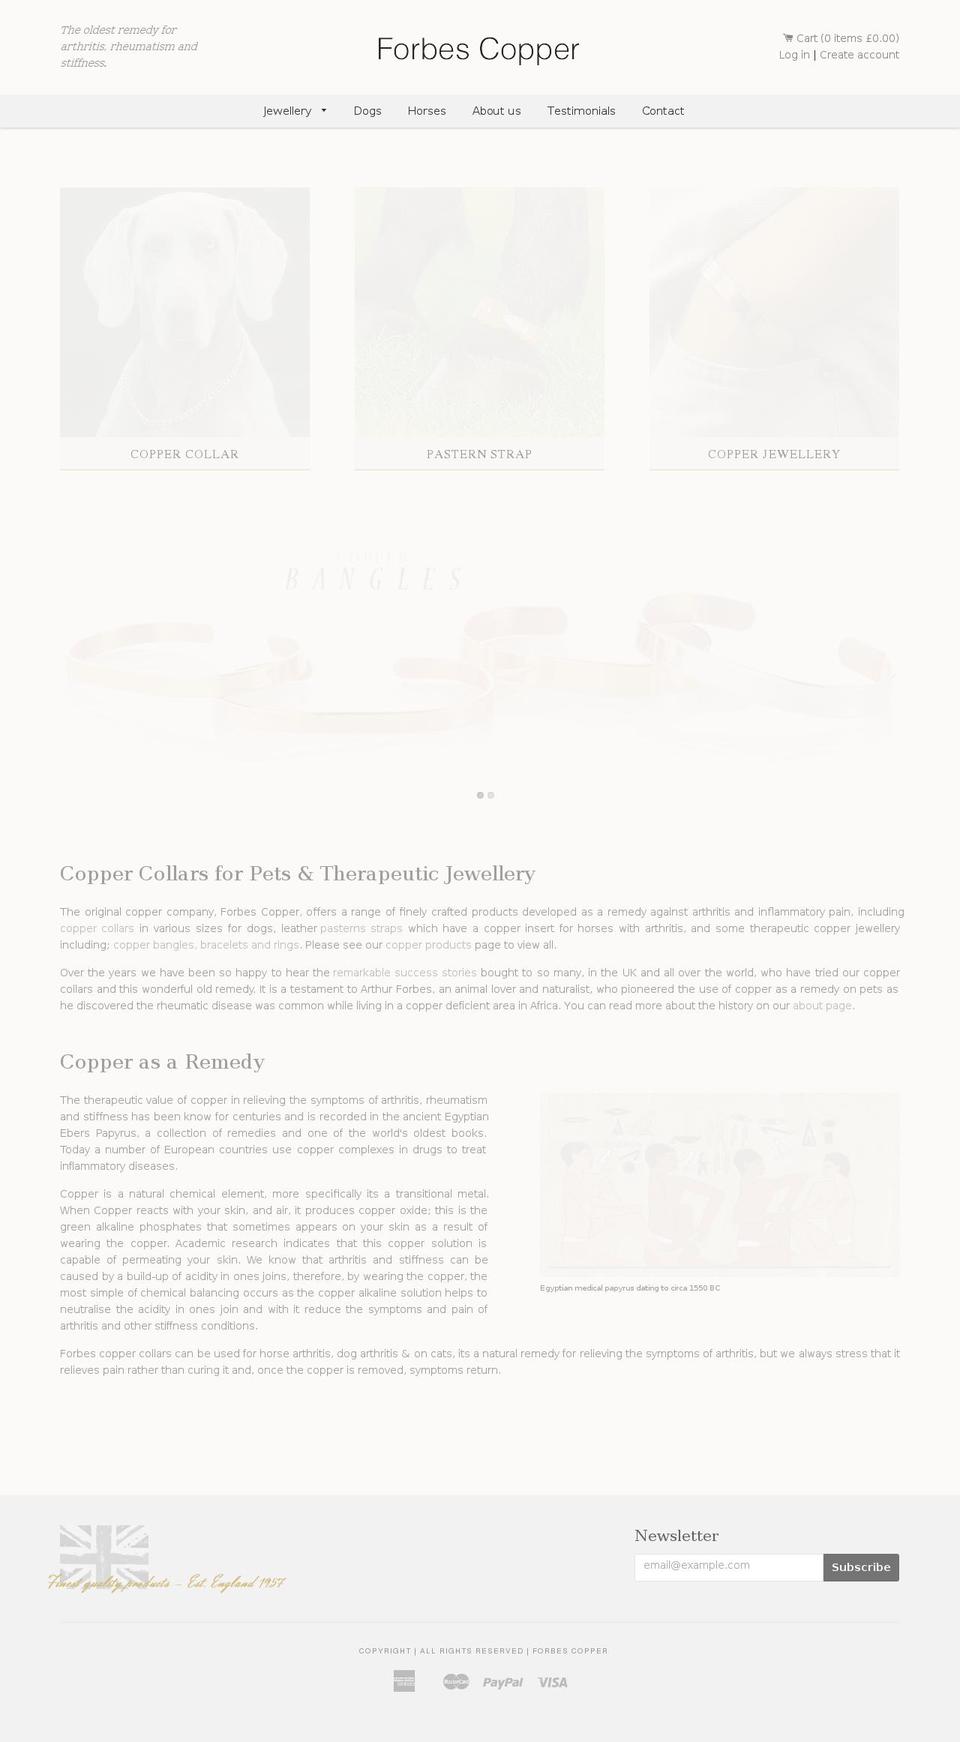 Timber Shopify theme site example forbescopper.com